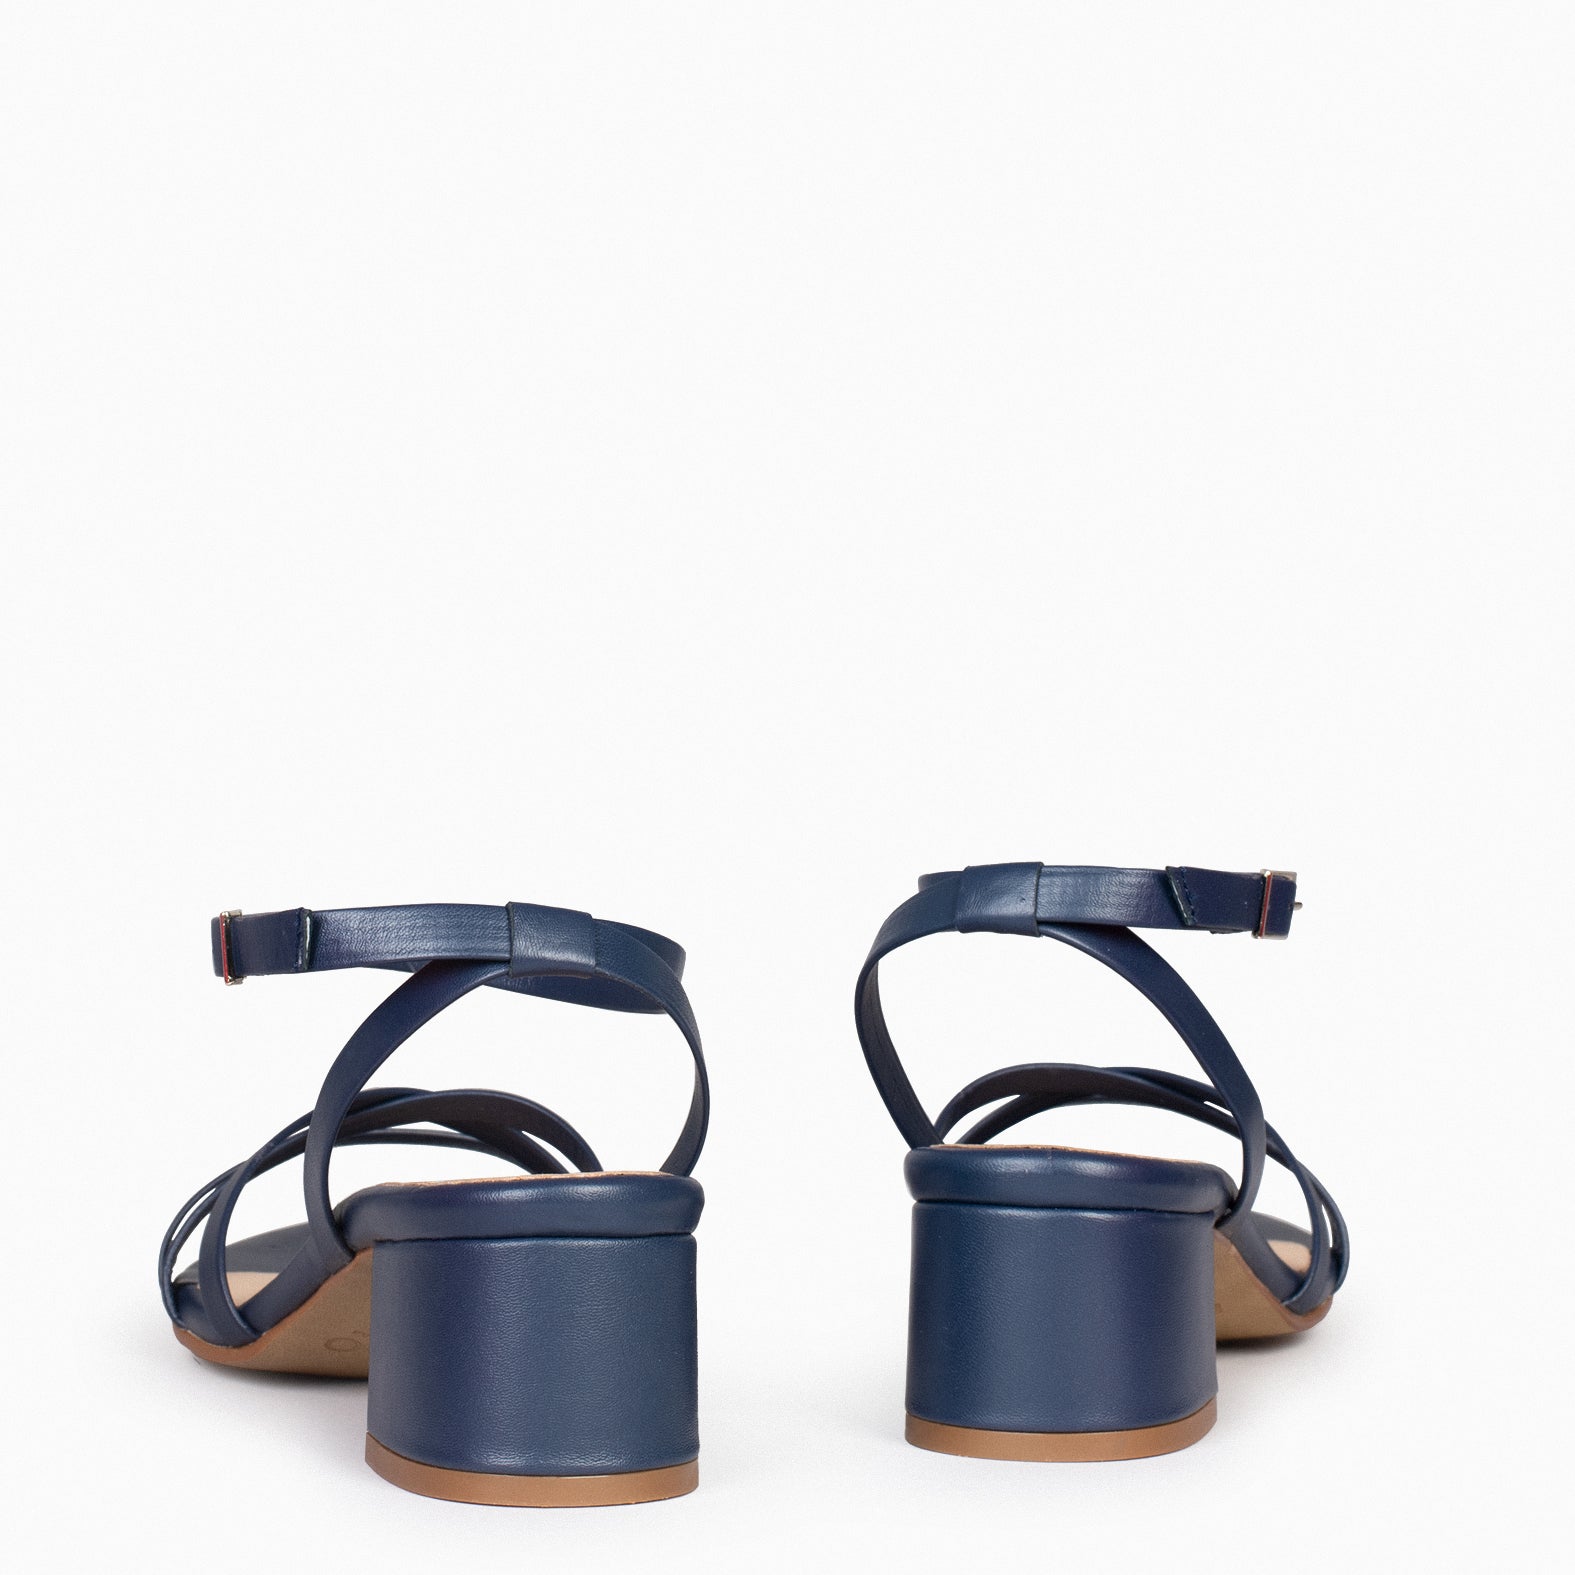 VIENA – NAVY SANDAL WITH THIN STRAPS AND LOW HEEL